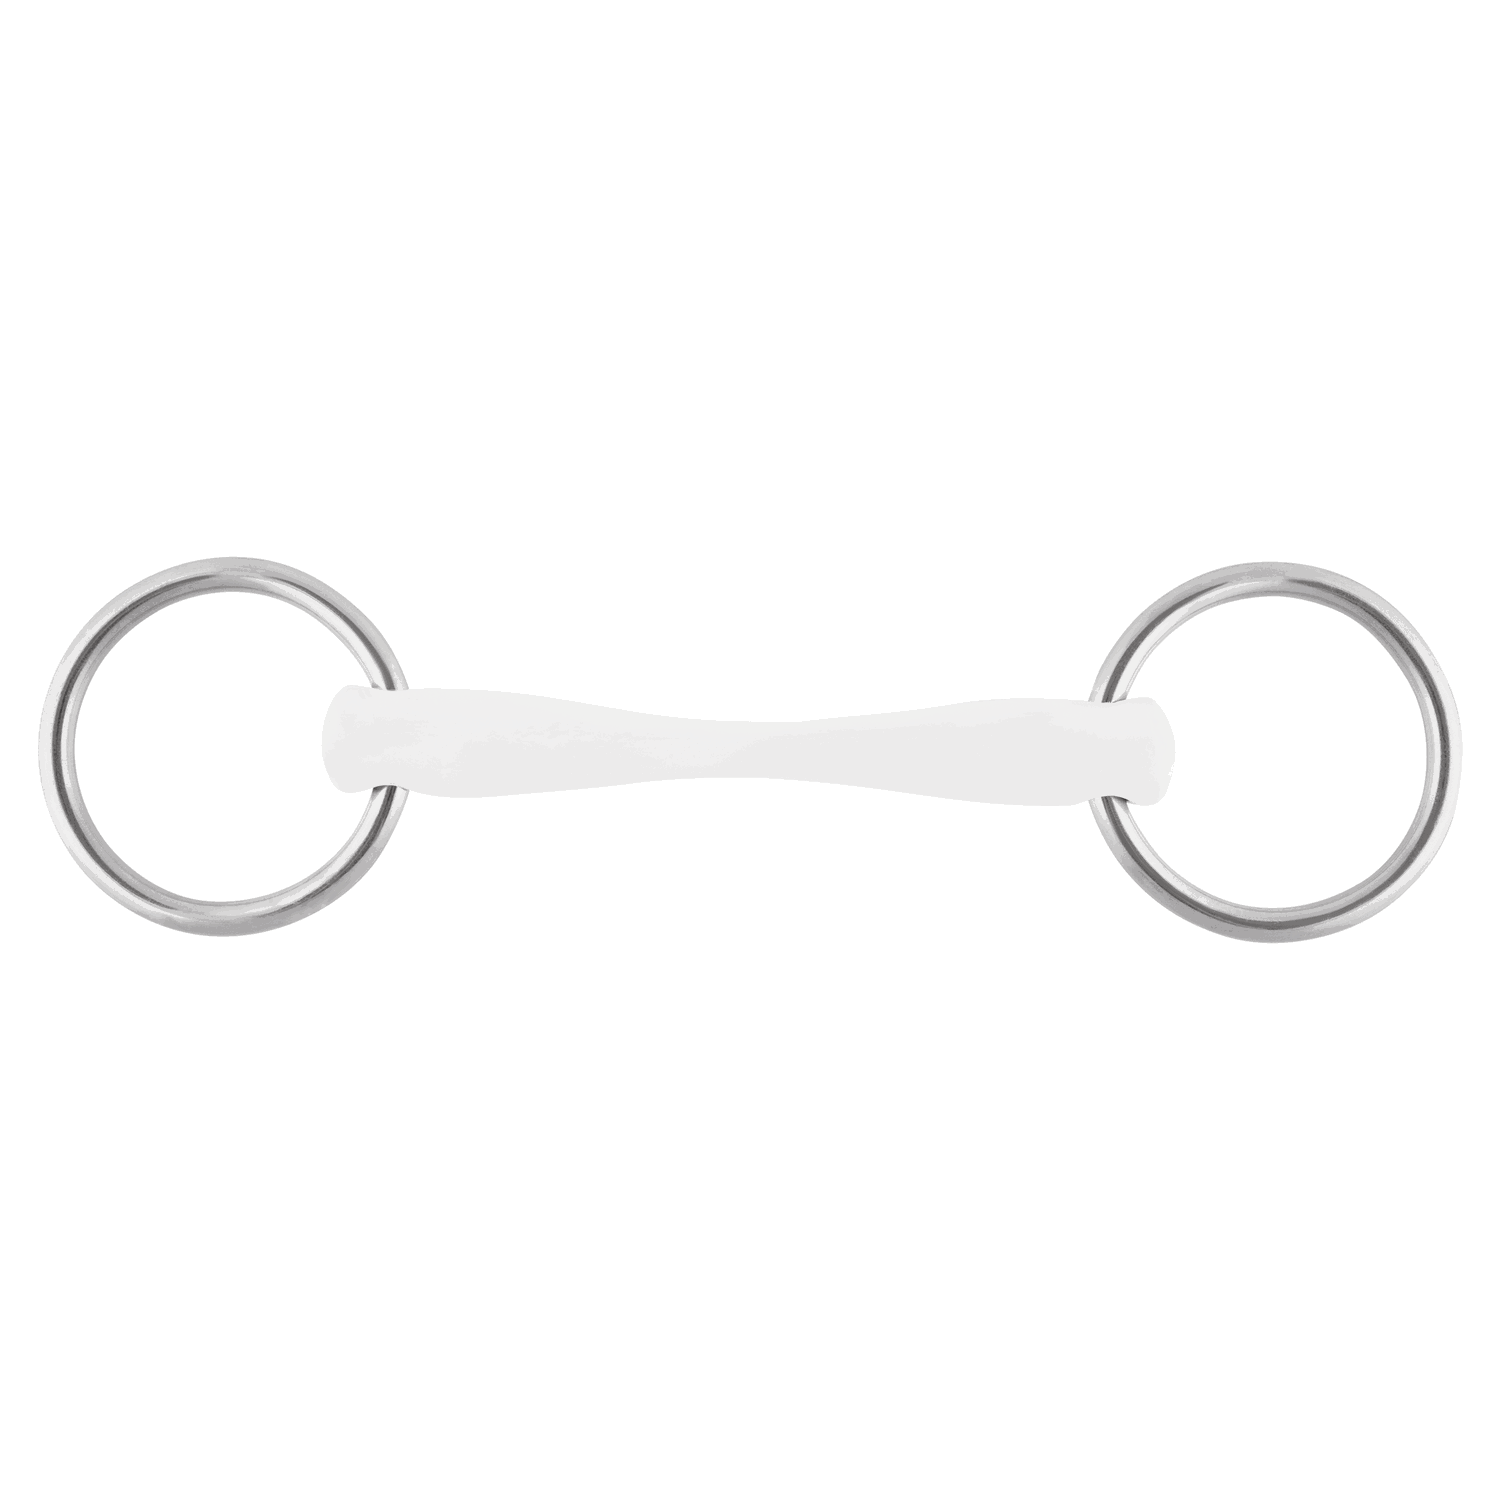 Nathe Pony Standard Snaffle with Flexible Mullen Mouth